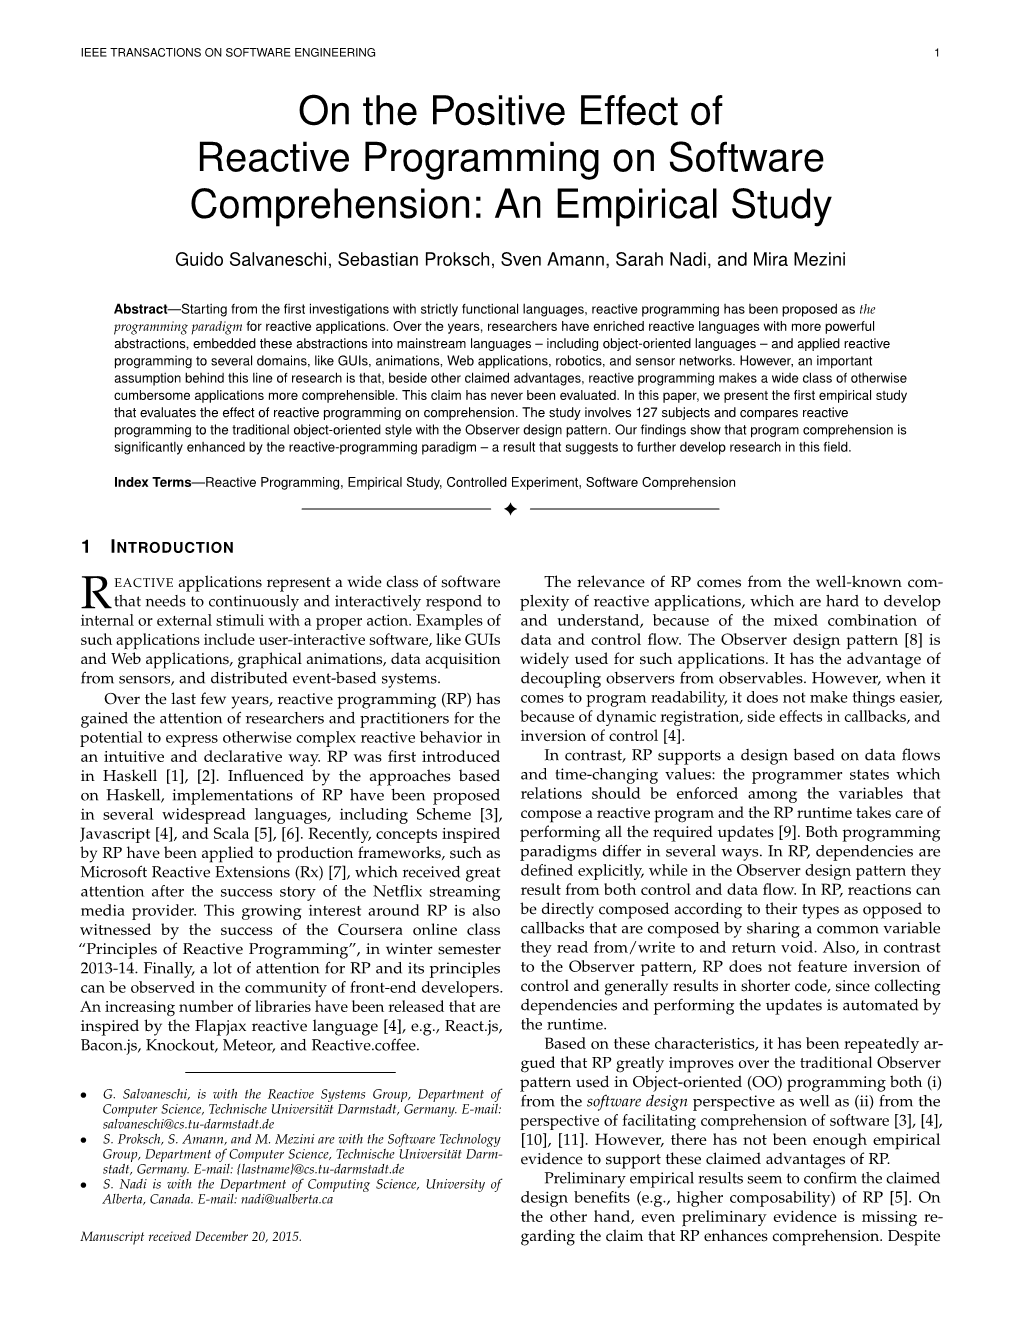 On the Positive Effect of Reactive Programming on Software Comprehension: an Empirical Study